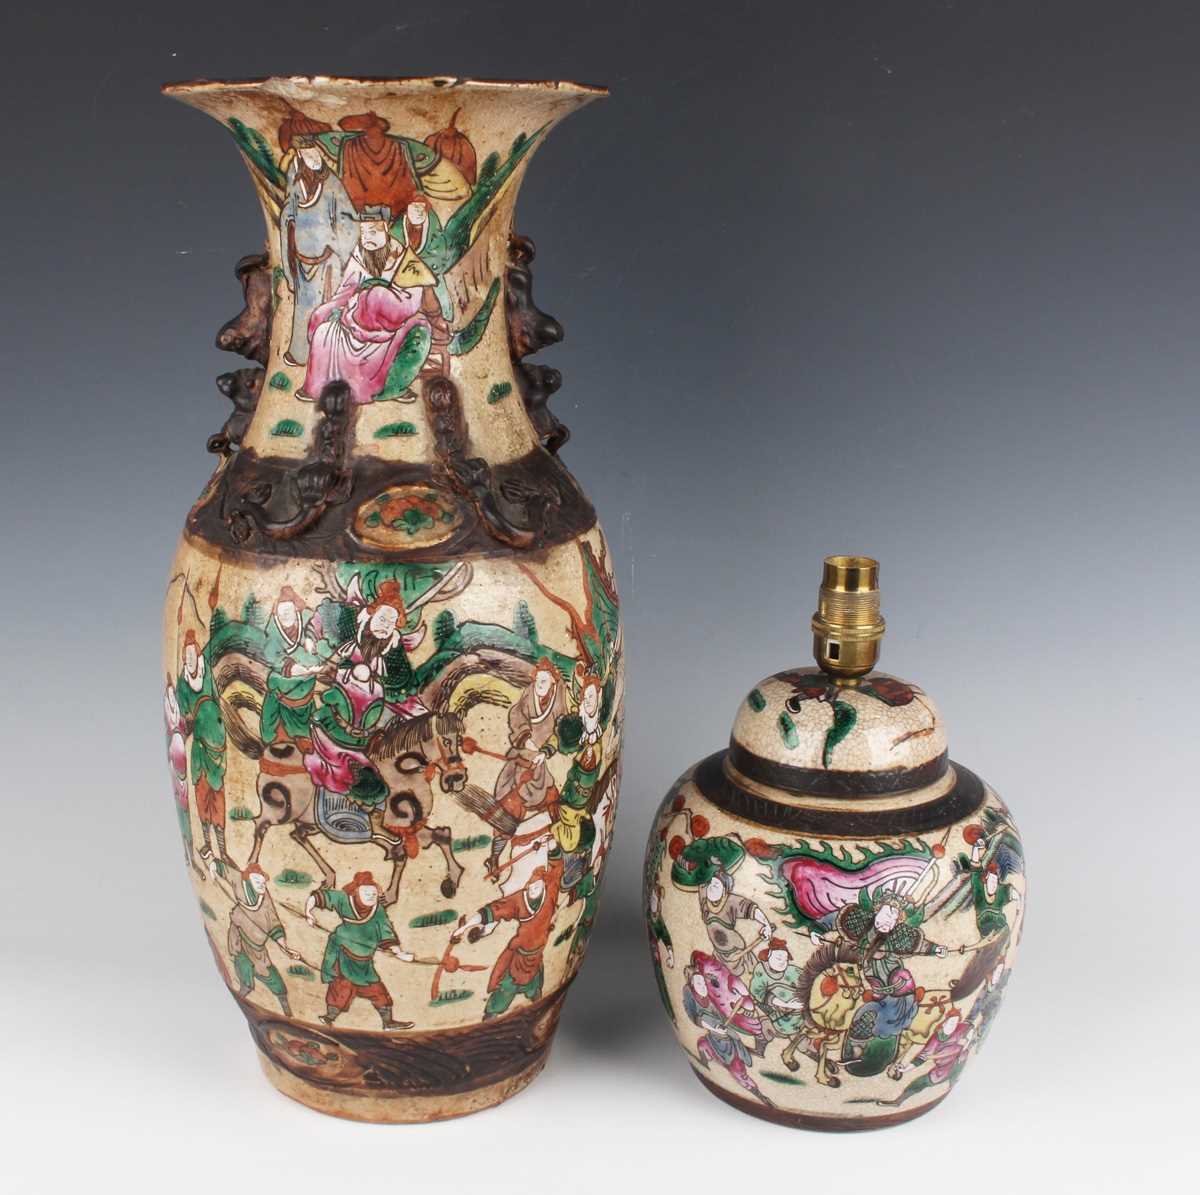 A Chinese crackle glazed porcelain vase, early 20th century, the ovoid body and flared neck